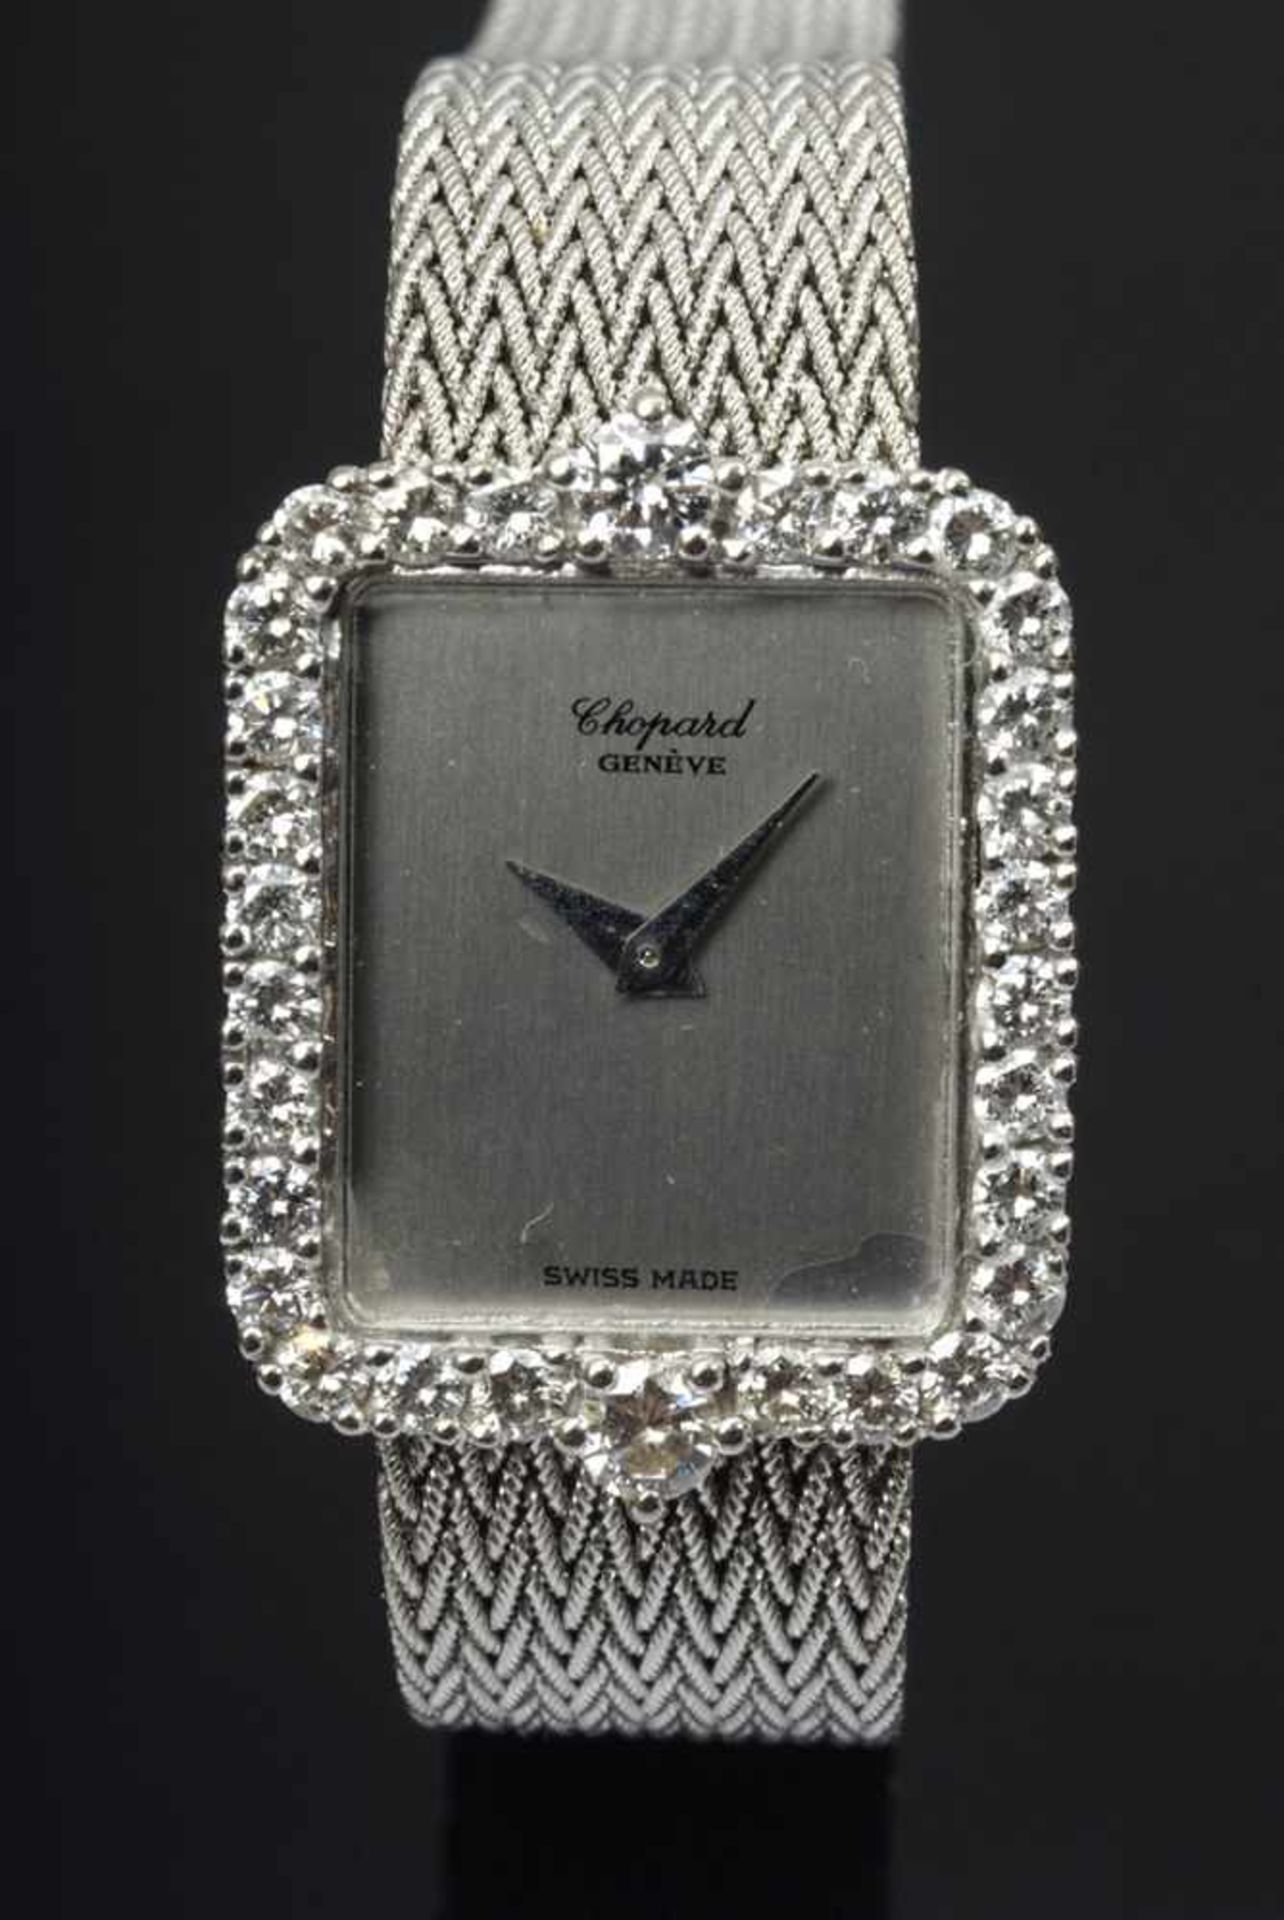 Luxurious WG 750 Chopard wristwatch with Milannaiseband and brilliant bezel (add. approx. 1.10ct/ - Image 2 of 4